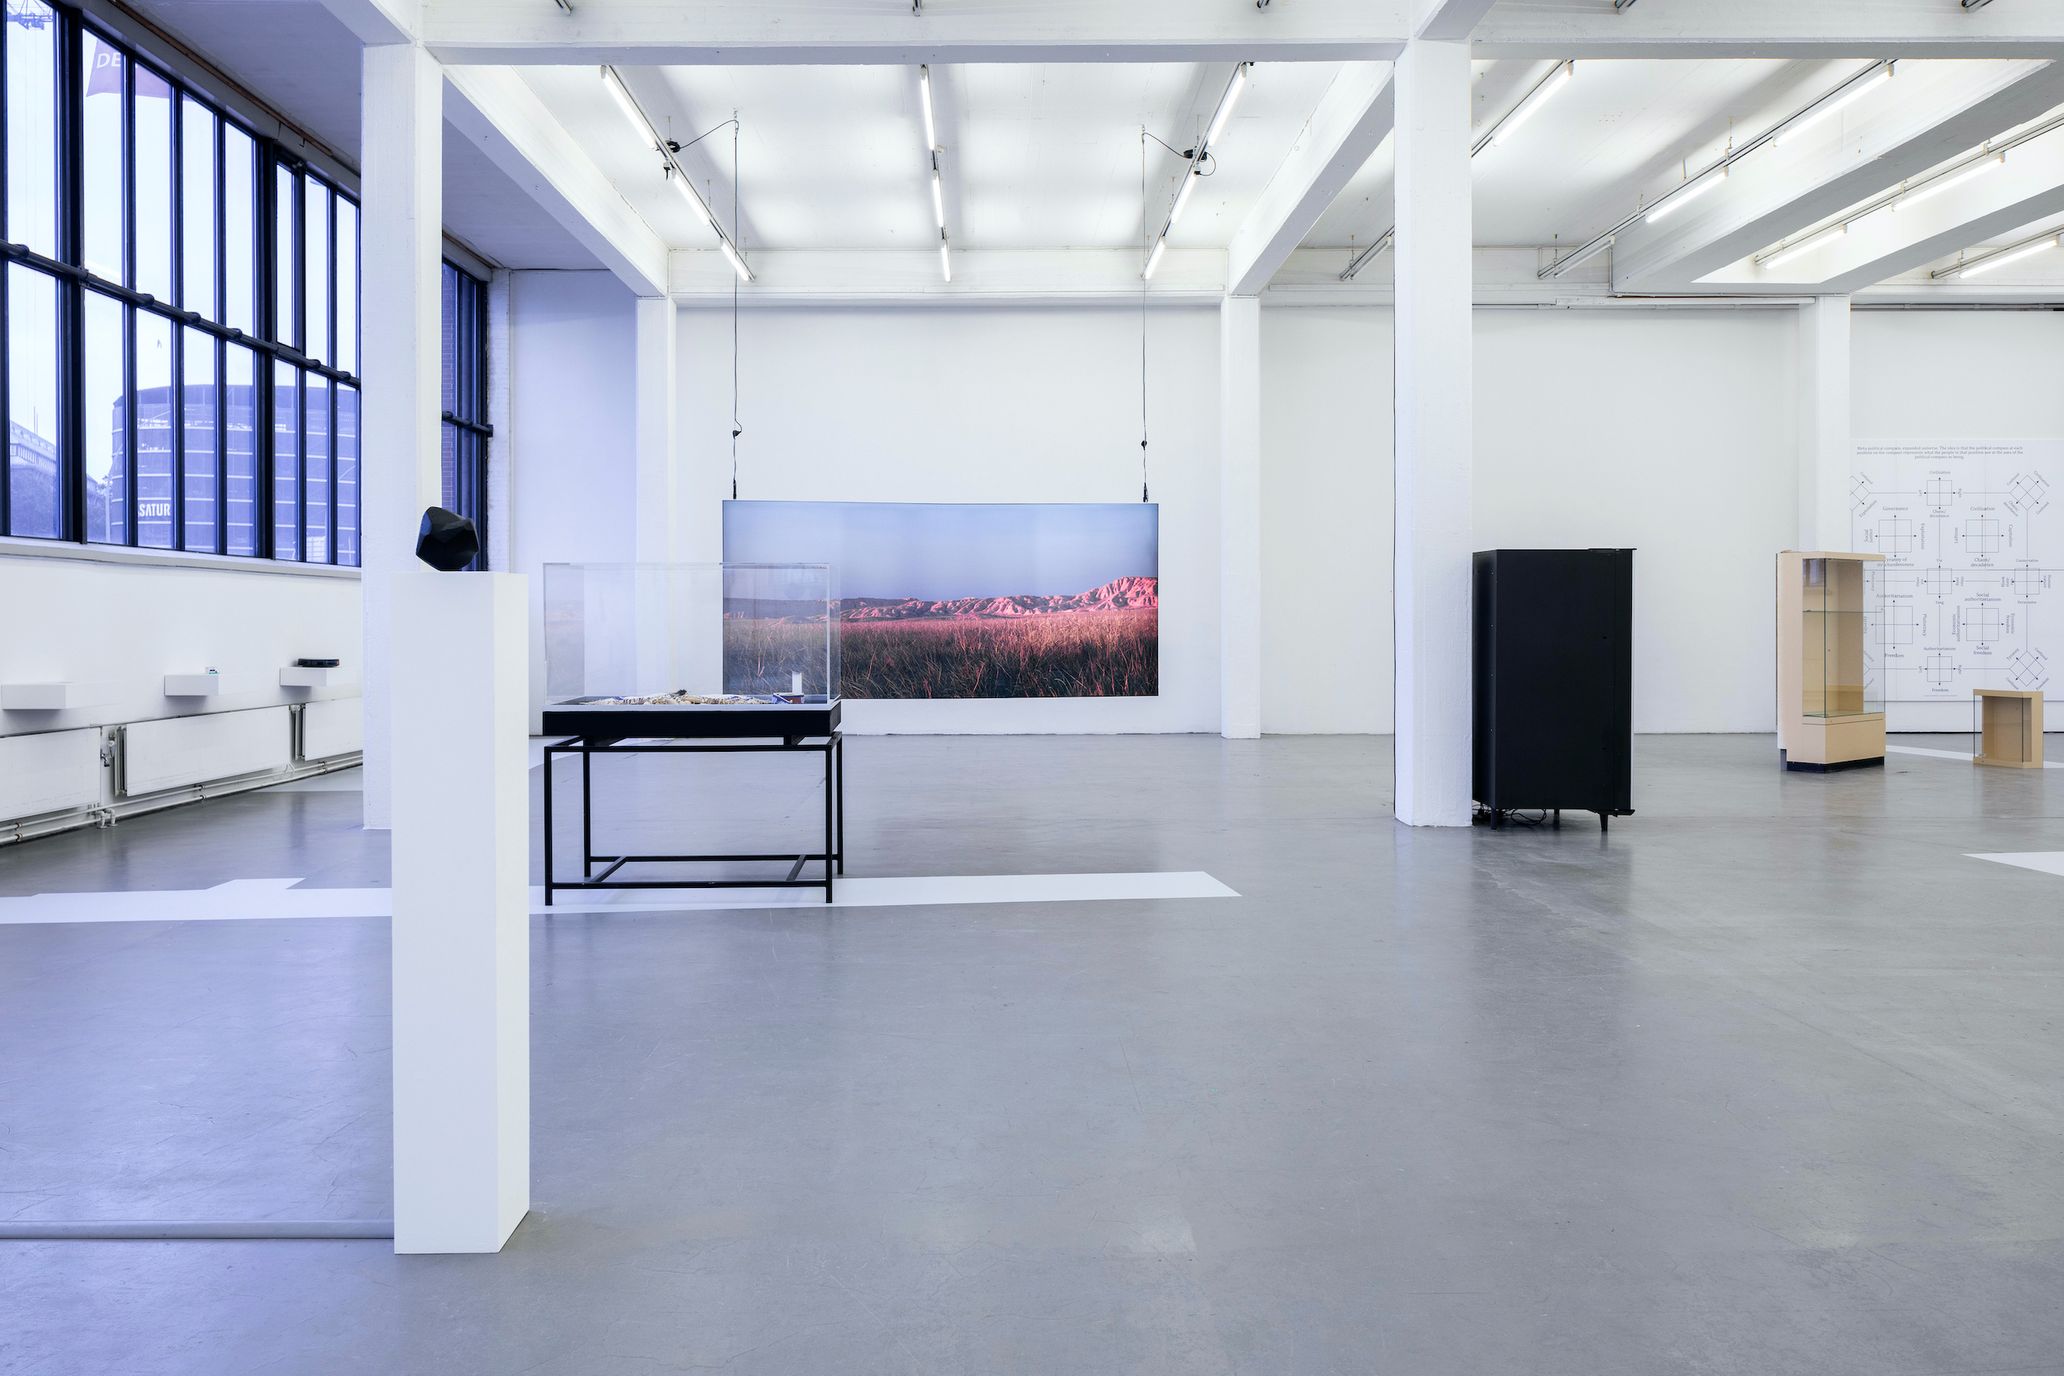 《Proof of Stake》
Installation View, Proof of Stake – Technological Claims, Kunstverein in Hamburg, 2021
Photography Fred Dott